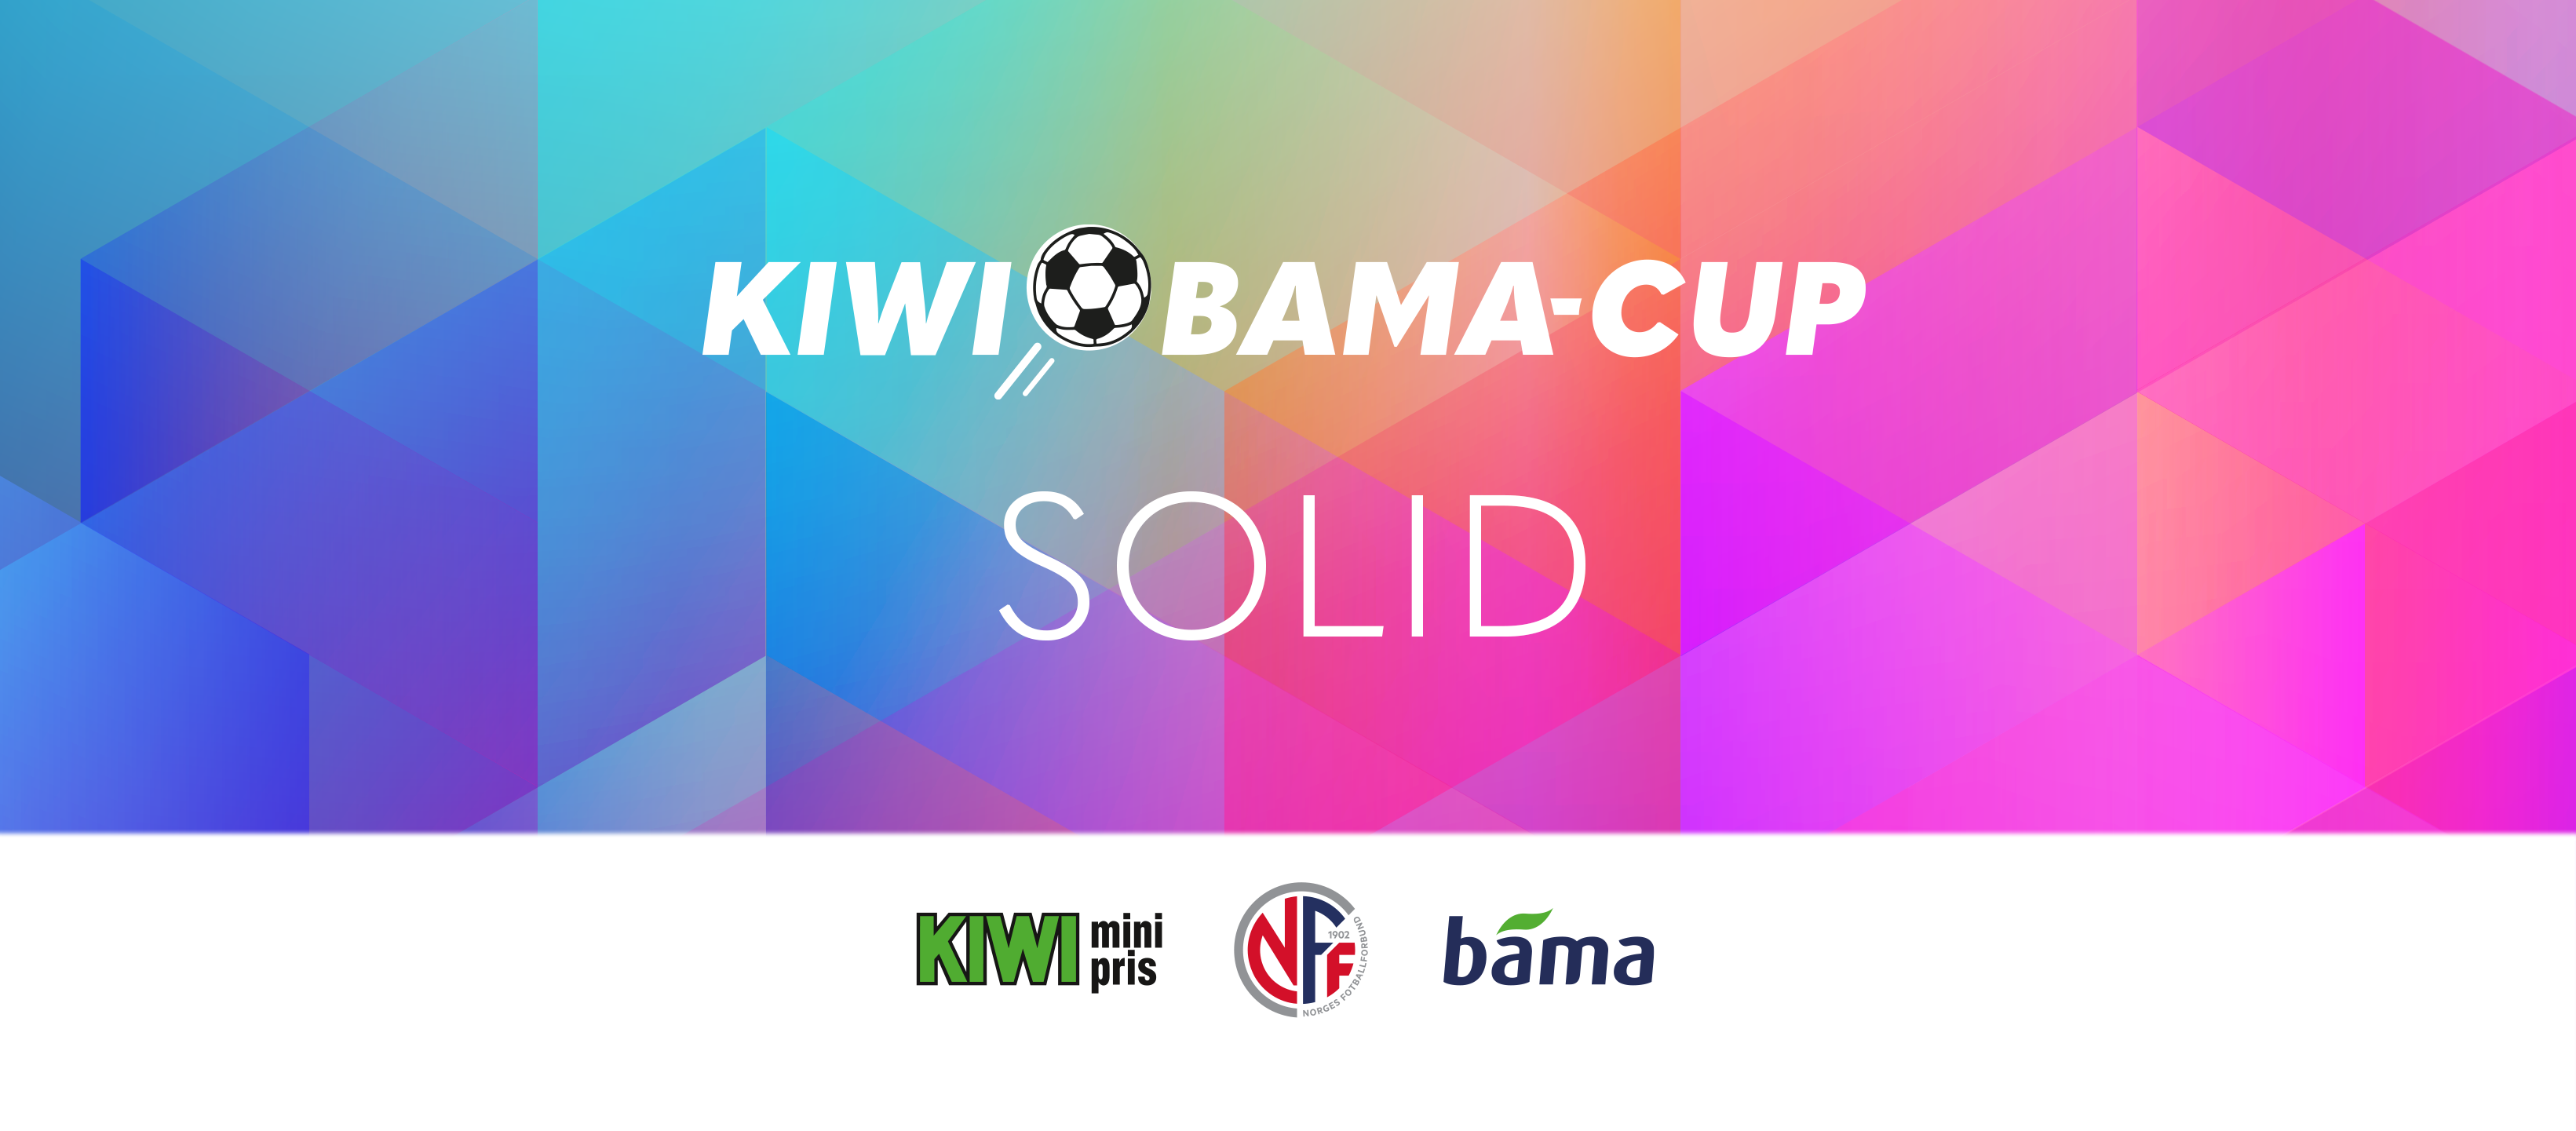 FB-BANNER KIWI-BAMA-Cup - Solid.png